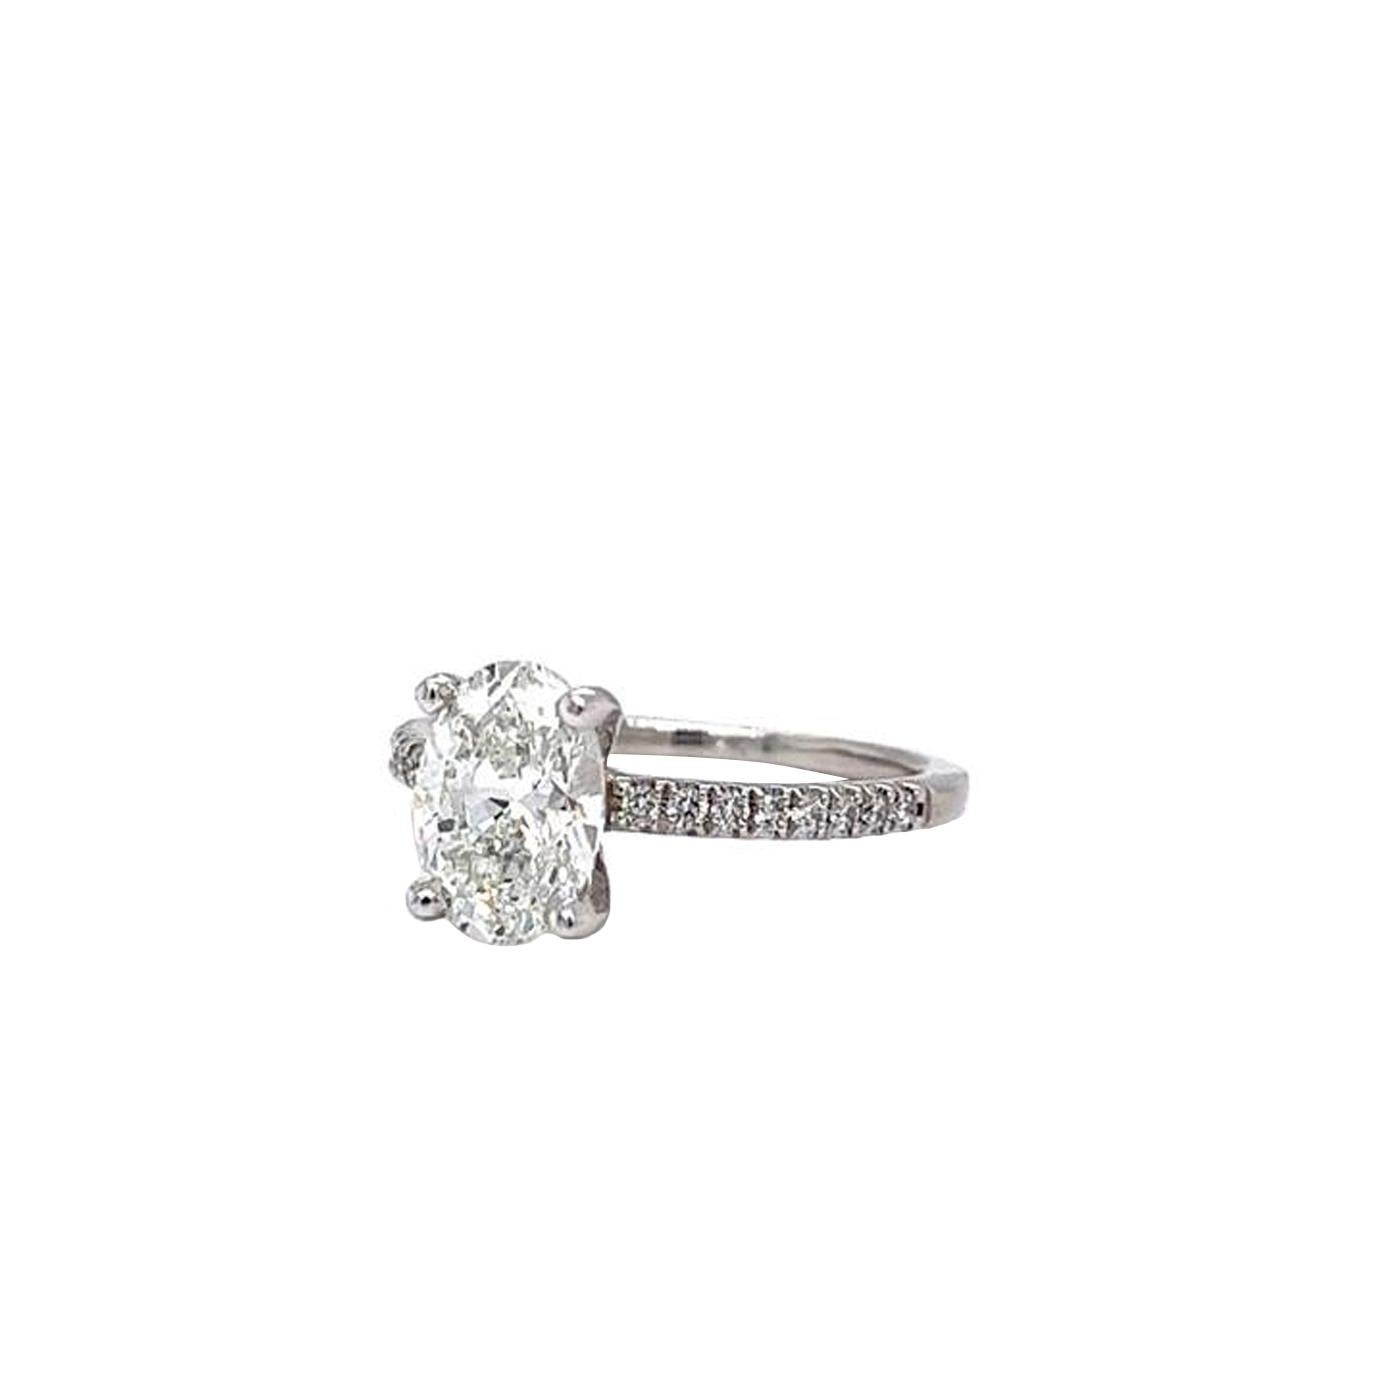 Exceptional GIA 1.70 Carat Oval Diamond with 0.55ct Pave Diamond Ring Flawless For Sale 1